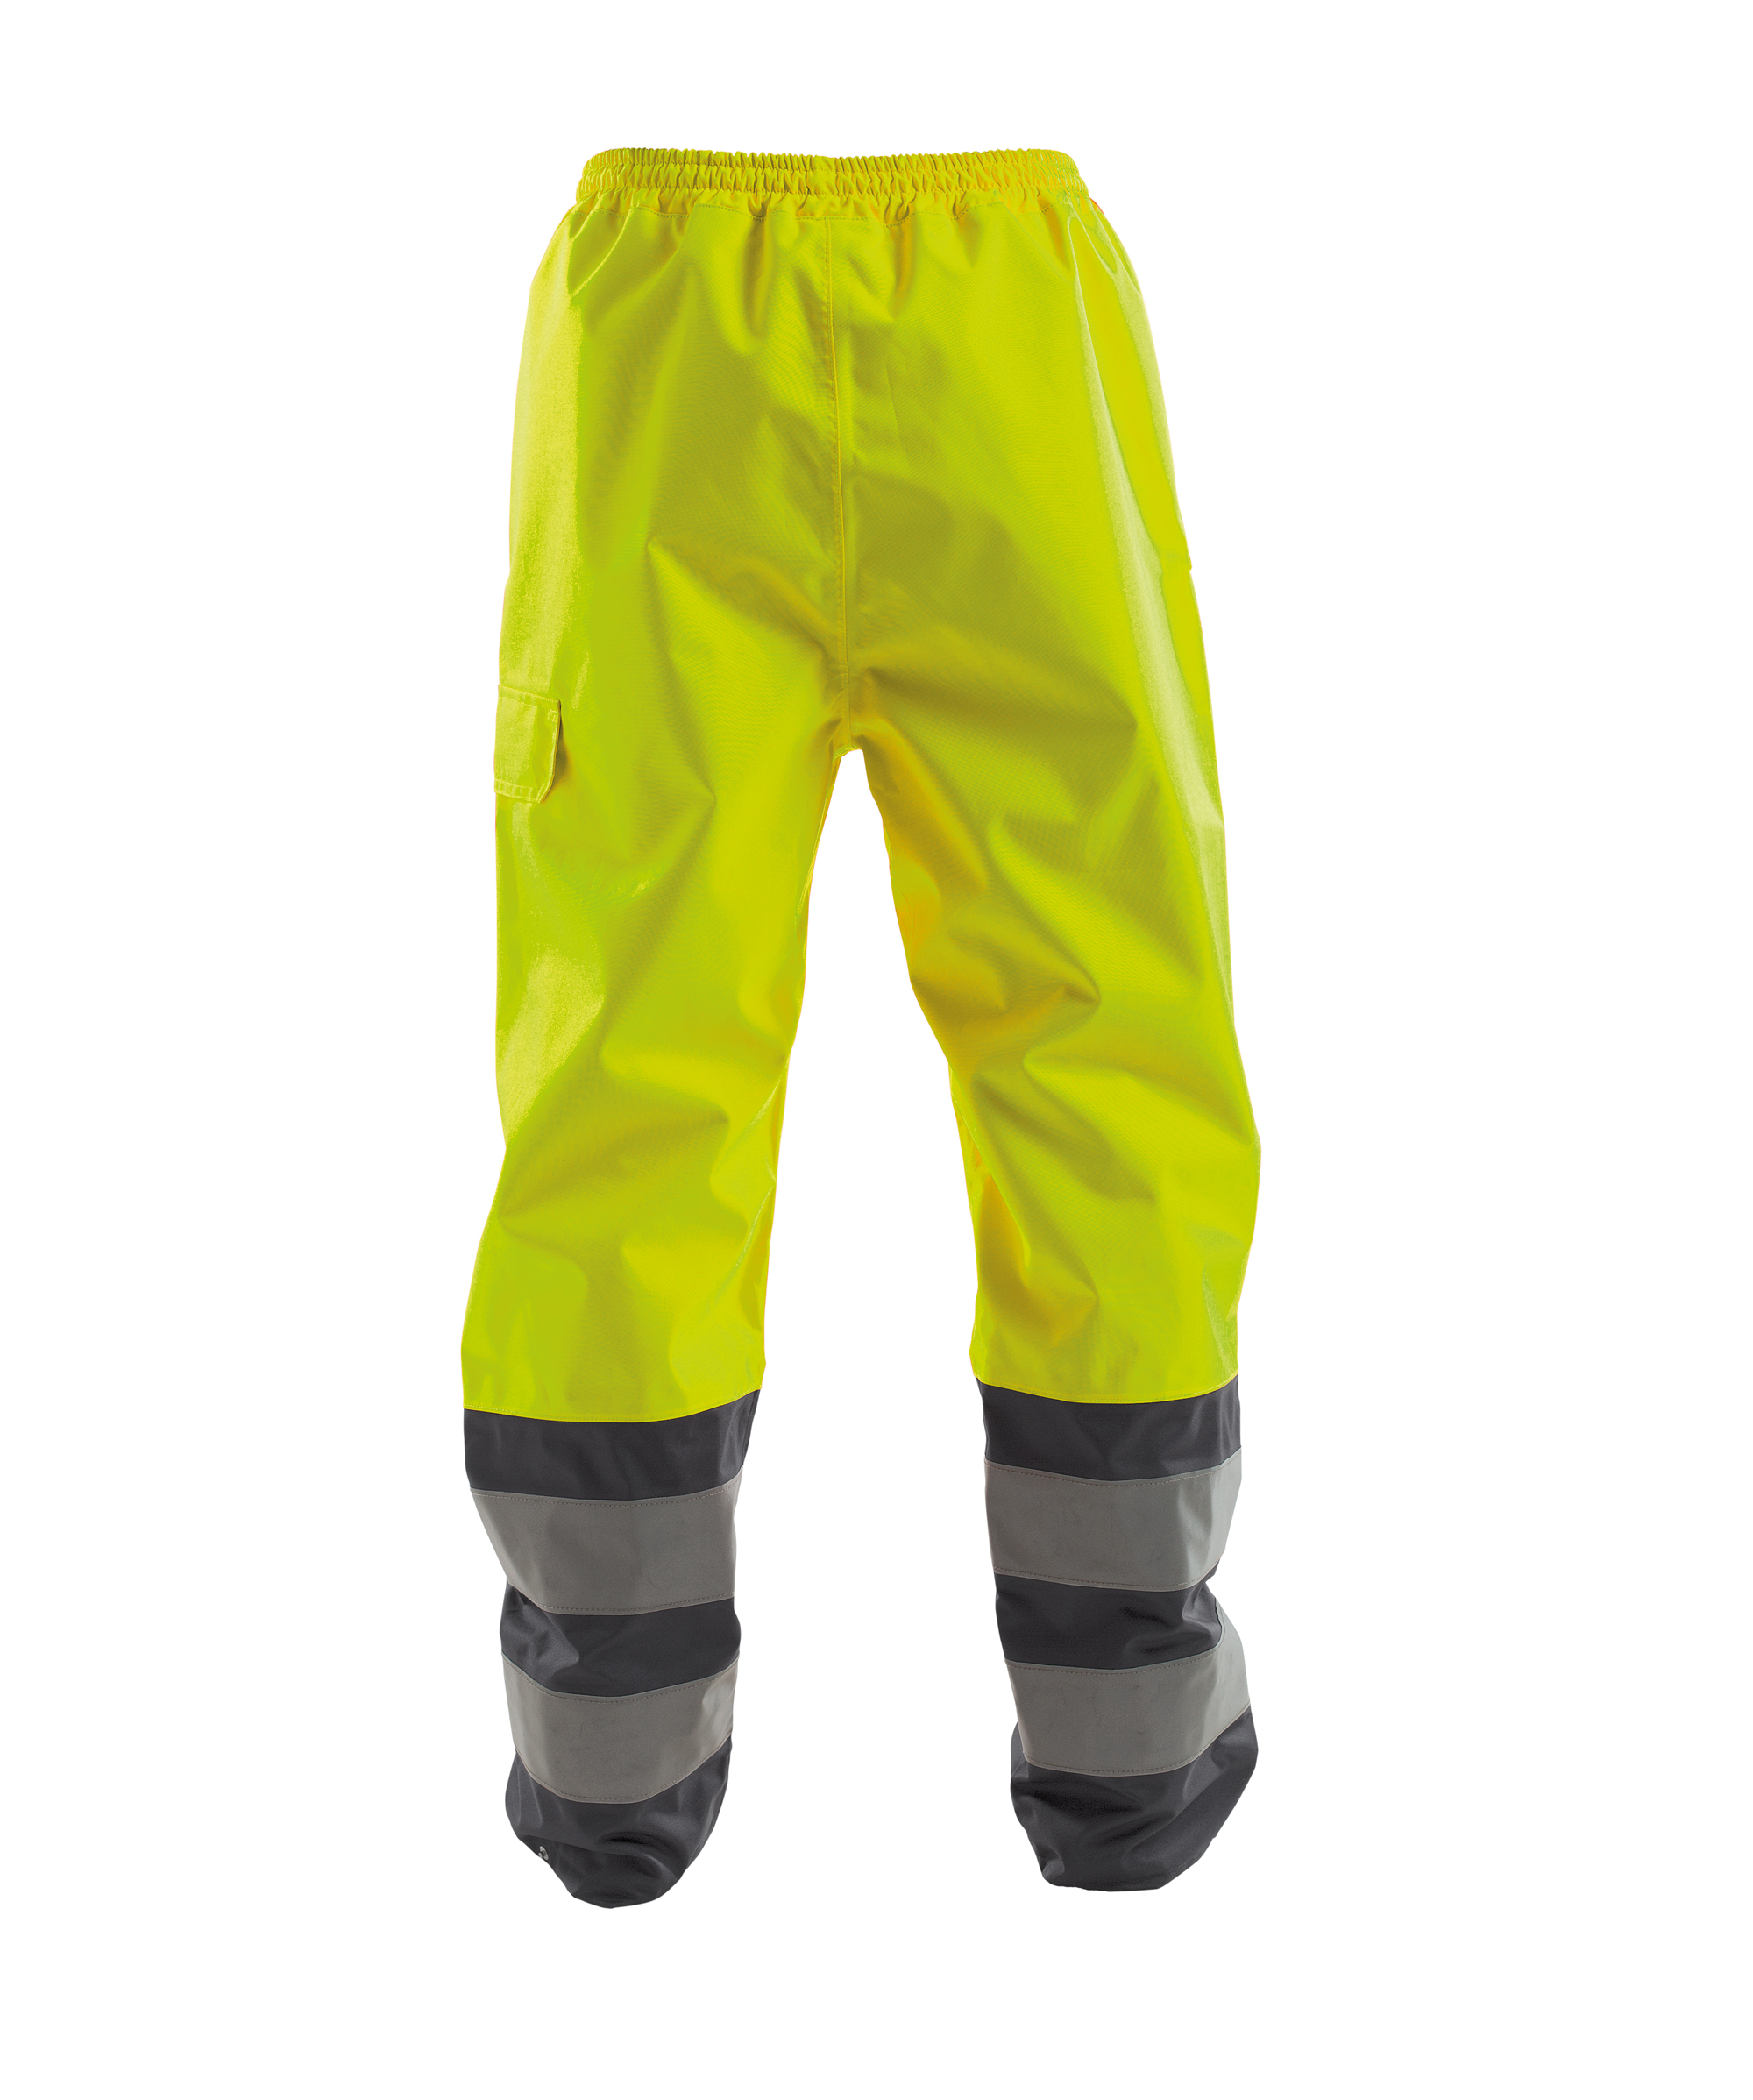 sola_high-visibility-waterproof-work-trousers_fluo-yellow-cement-grey_back.jpg